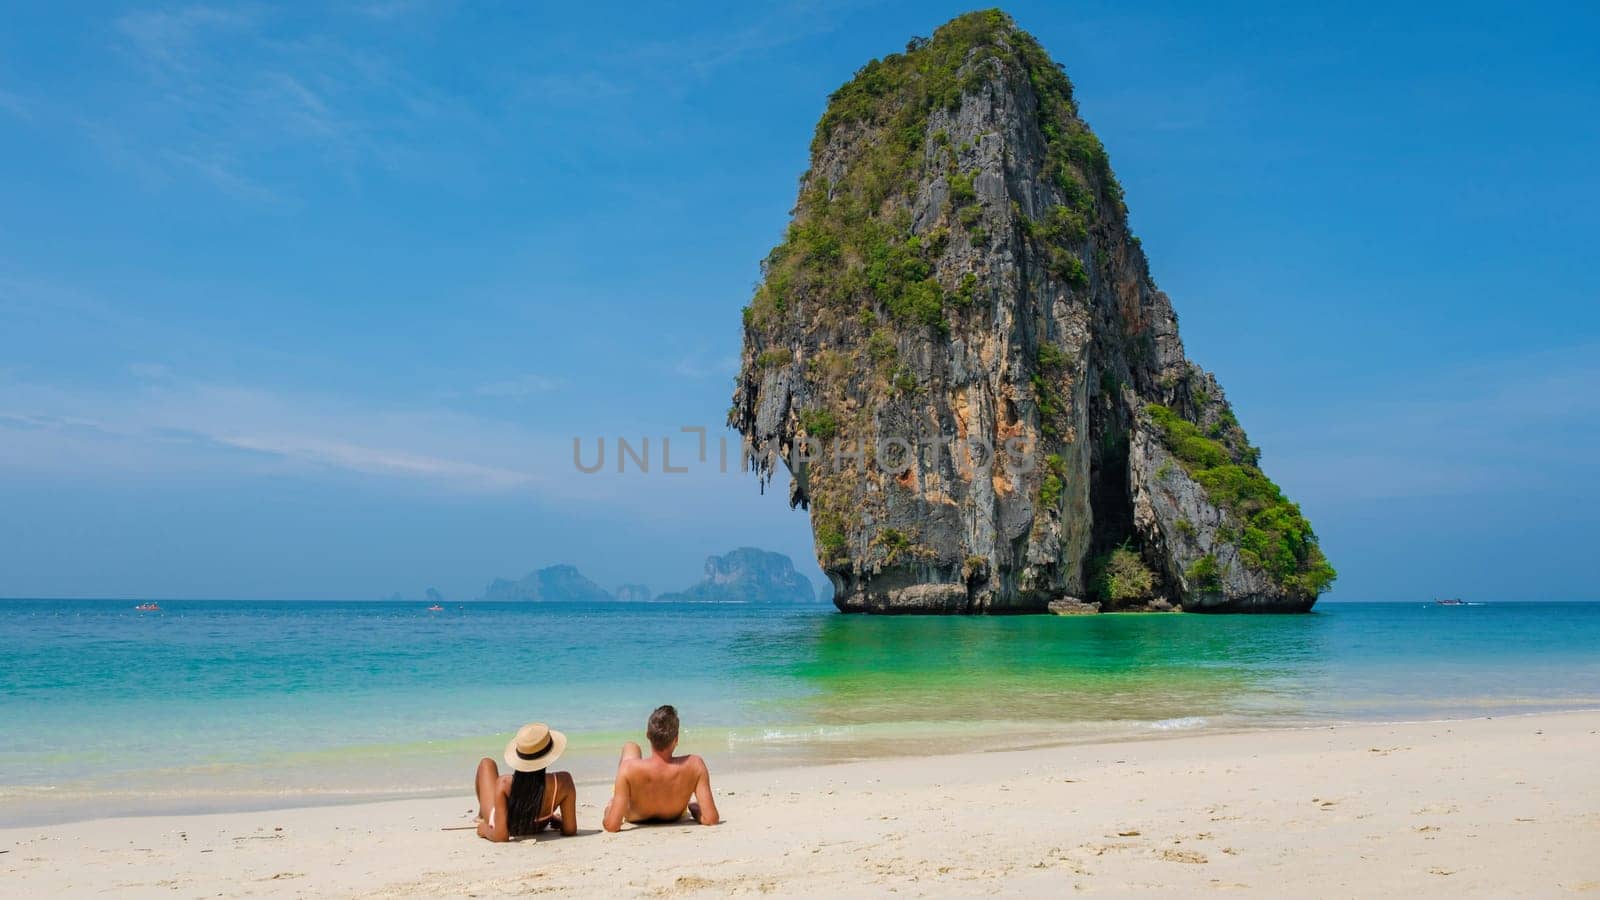 Two individuals enjoying the view of the ocean and large rock on the beach in Thailand by fokkebok